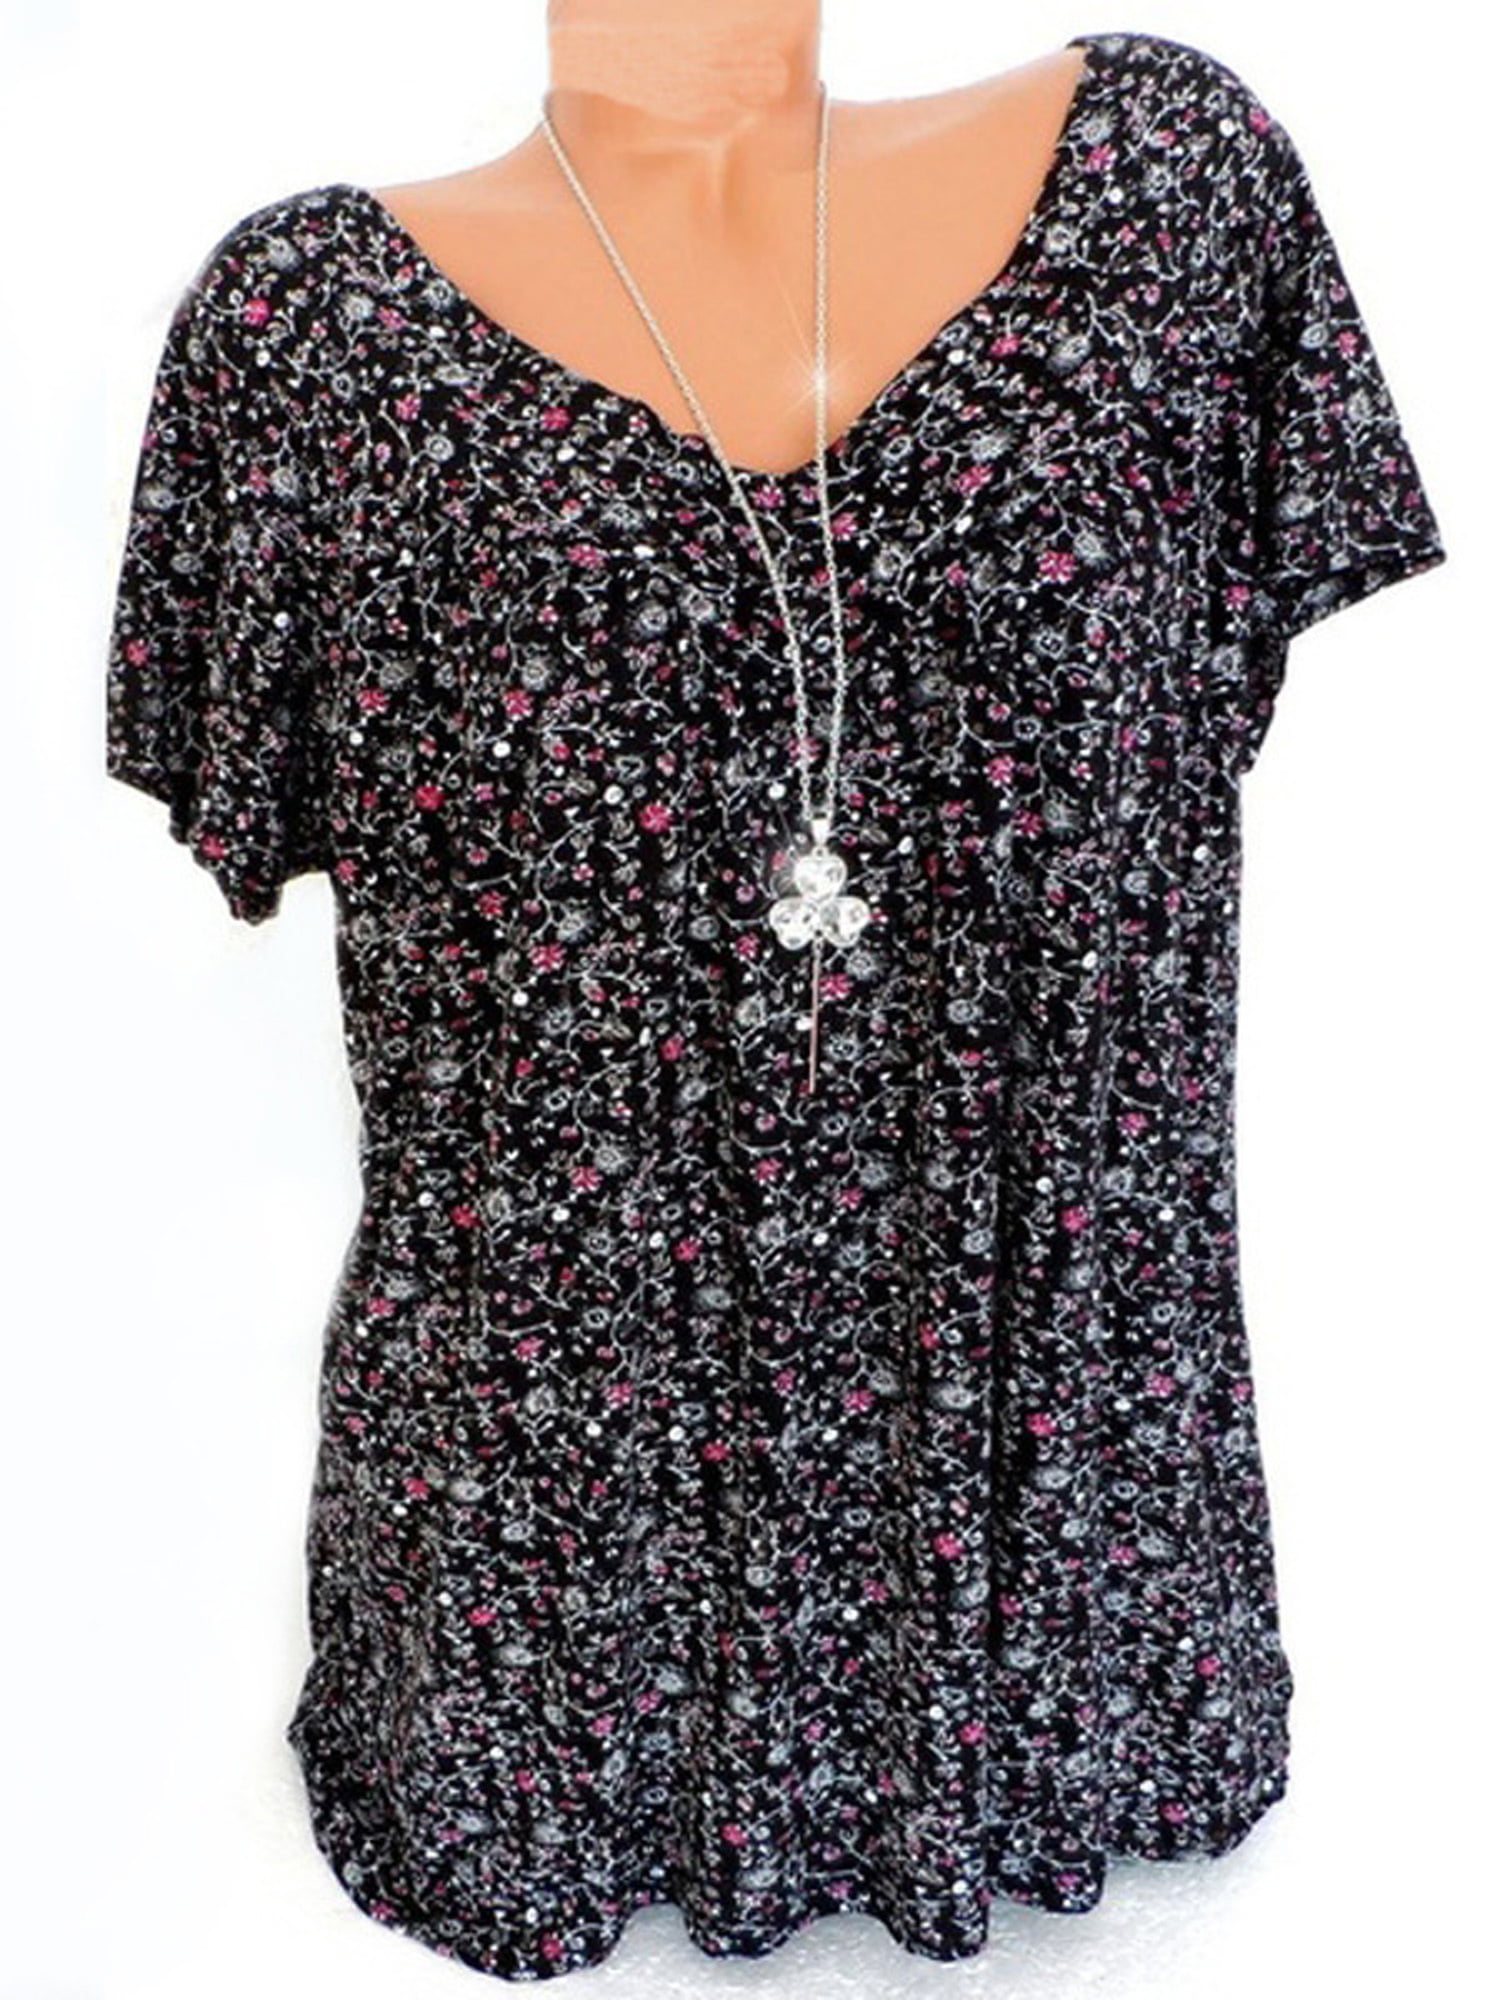 Women's Plus Size V Neck Floral Tops Short Sleeve Summer Loose T-shirts